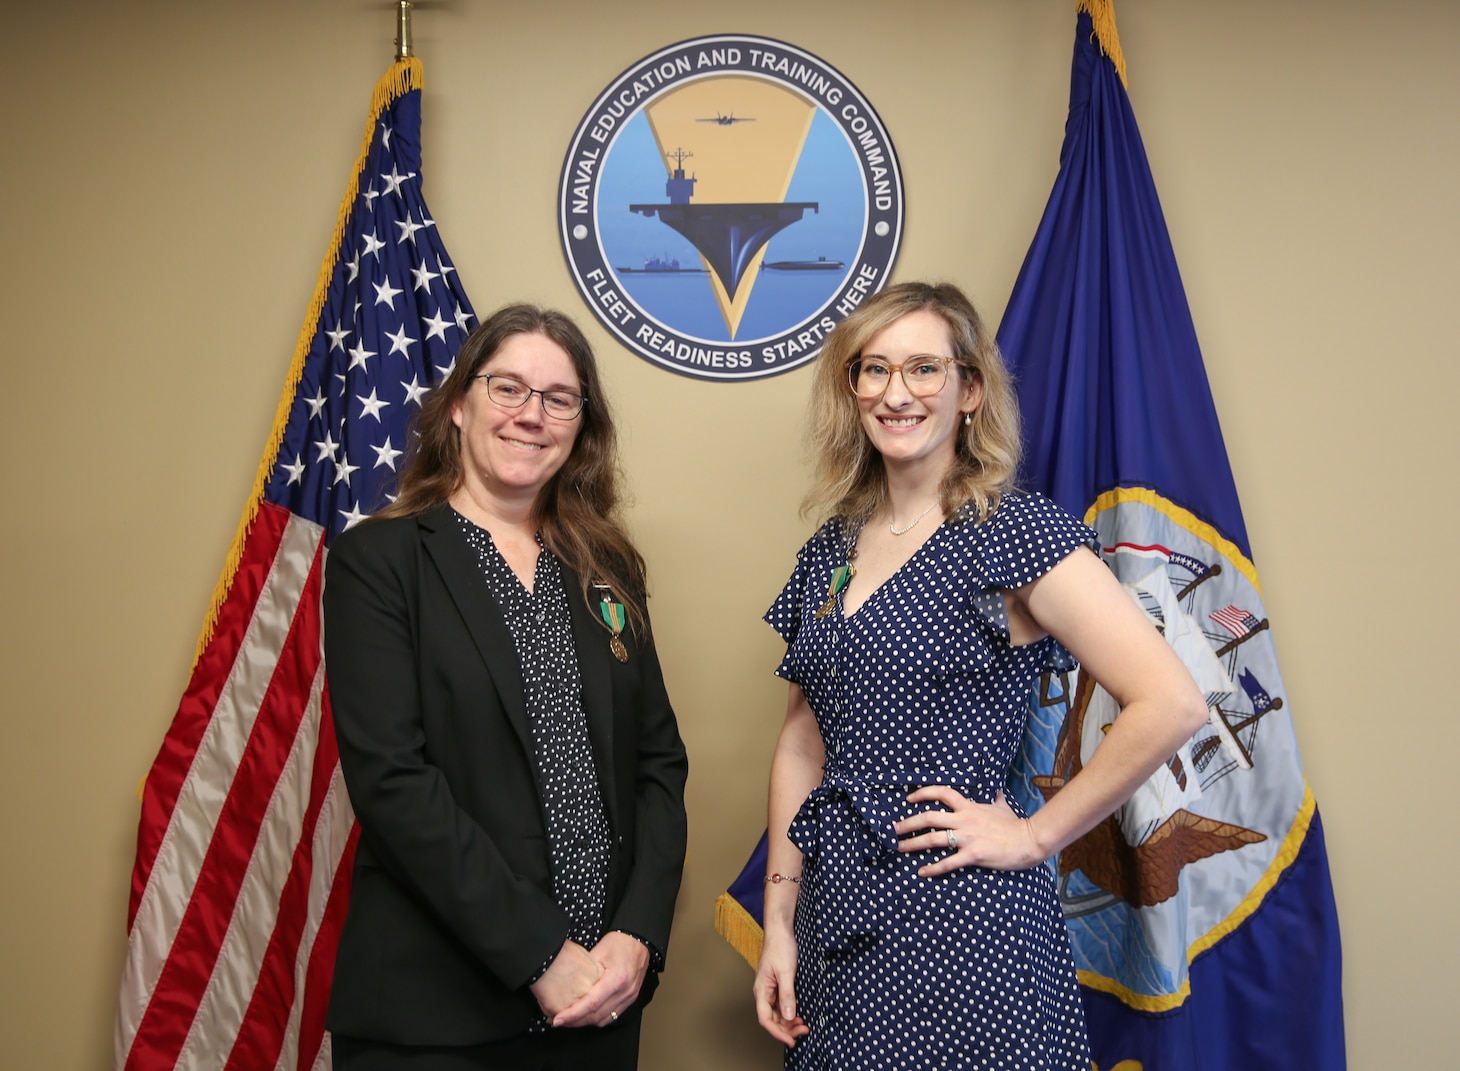 Carla McCarthy, left, deputy public affairs officer at Naval Education and Training Command's (NETC) Public Affairs Office in Pensacola, was selected as NETC’s second quarter of Fiscal Year 2021 Senior Civilian of the Quarter (COQ), and Brooke Passione, information system security officer (ISSM) and Navy qualified validator for NETC cyber security was selected as the Junior COQ.